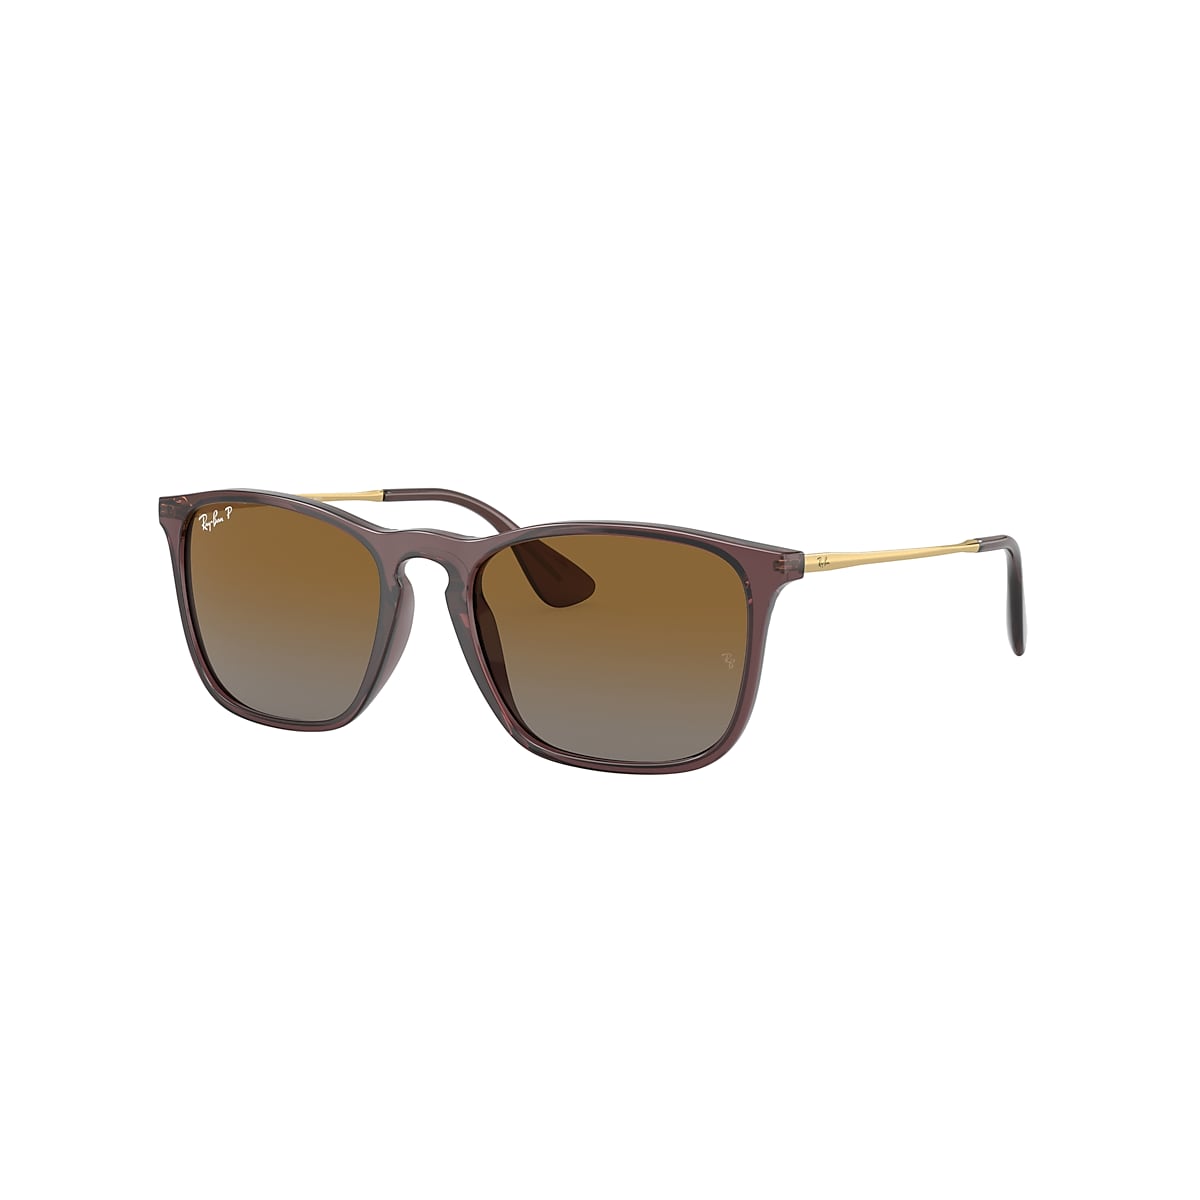 CHRIS Sunglasses in Transparent Brown and Brown - Ray-Ban